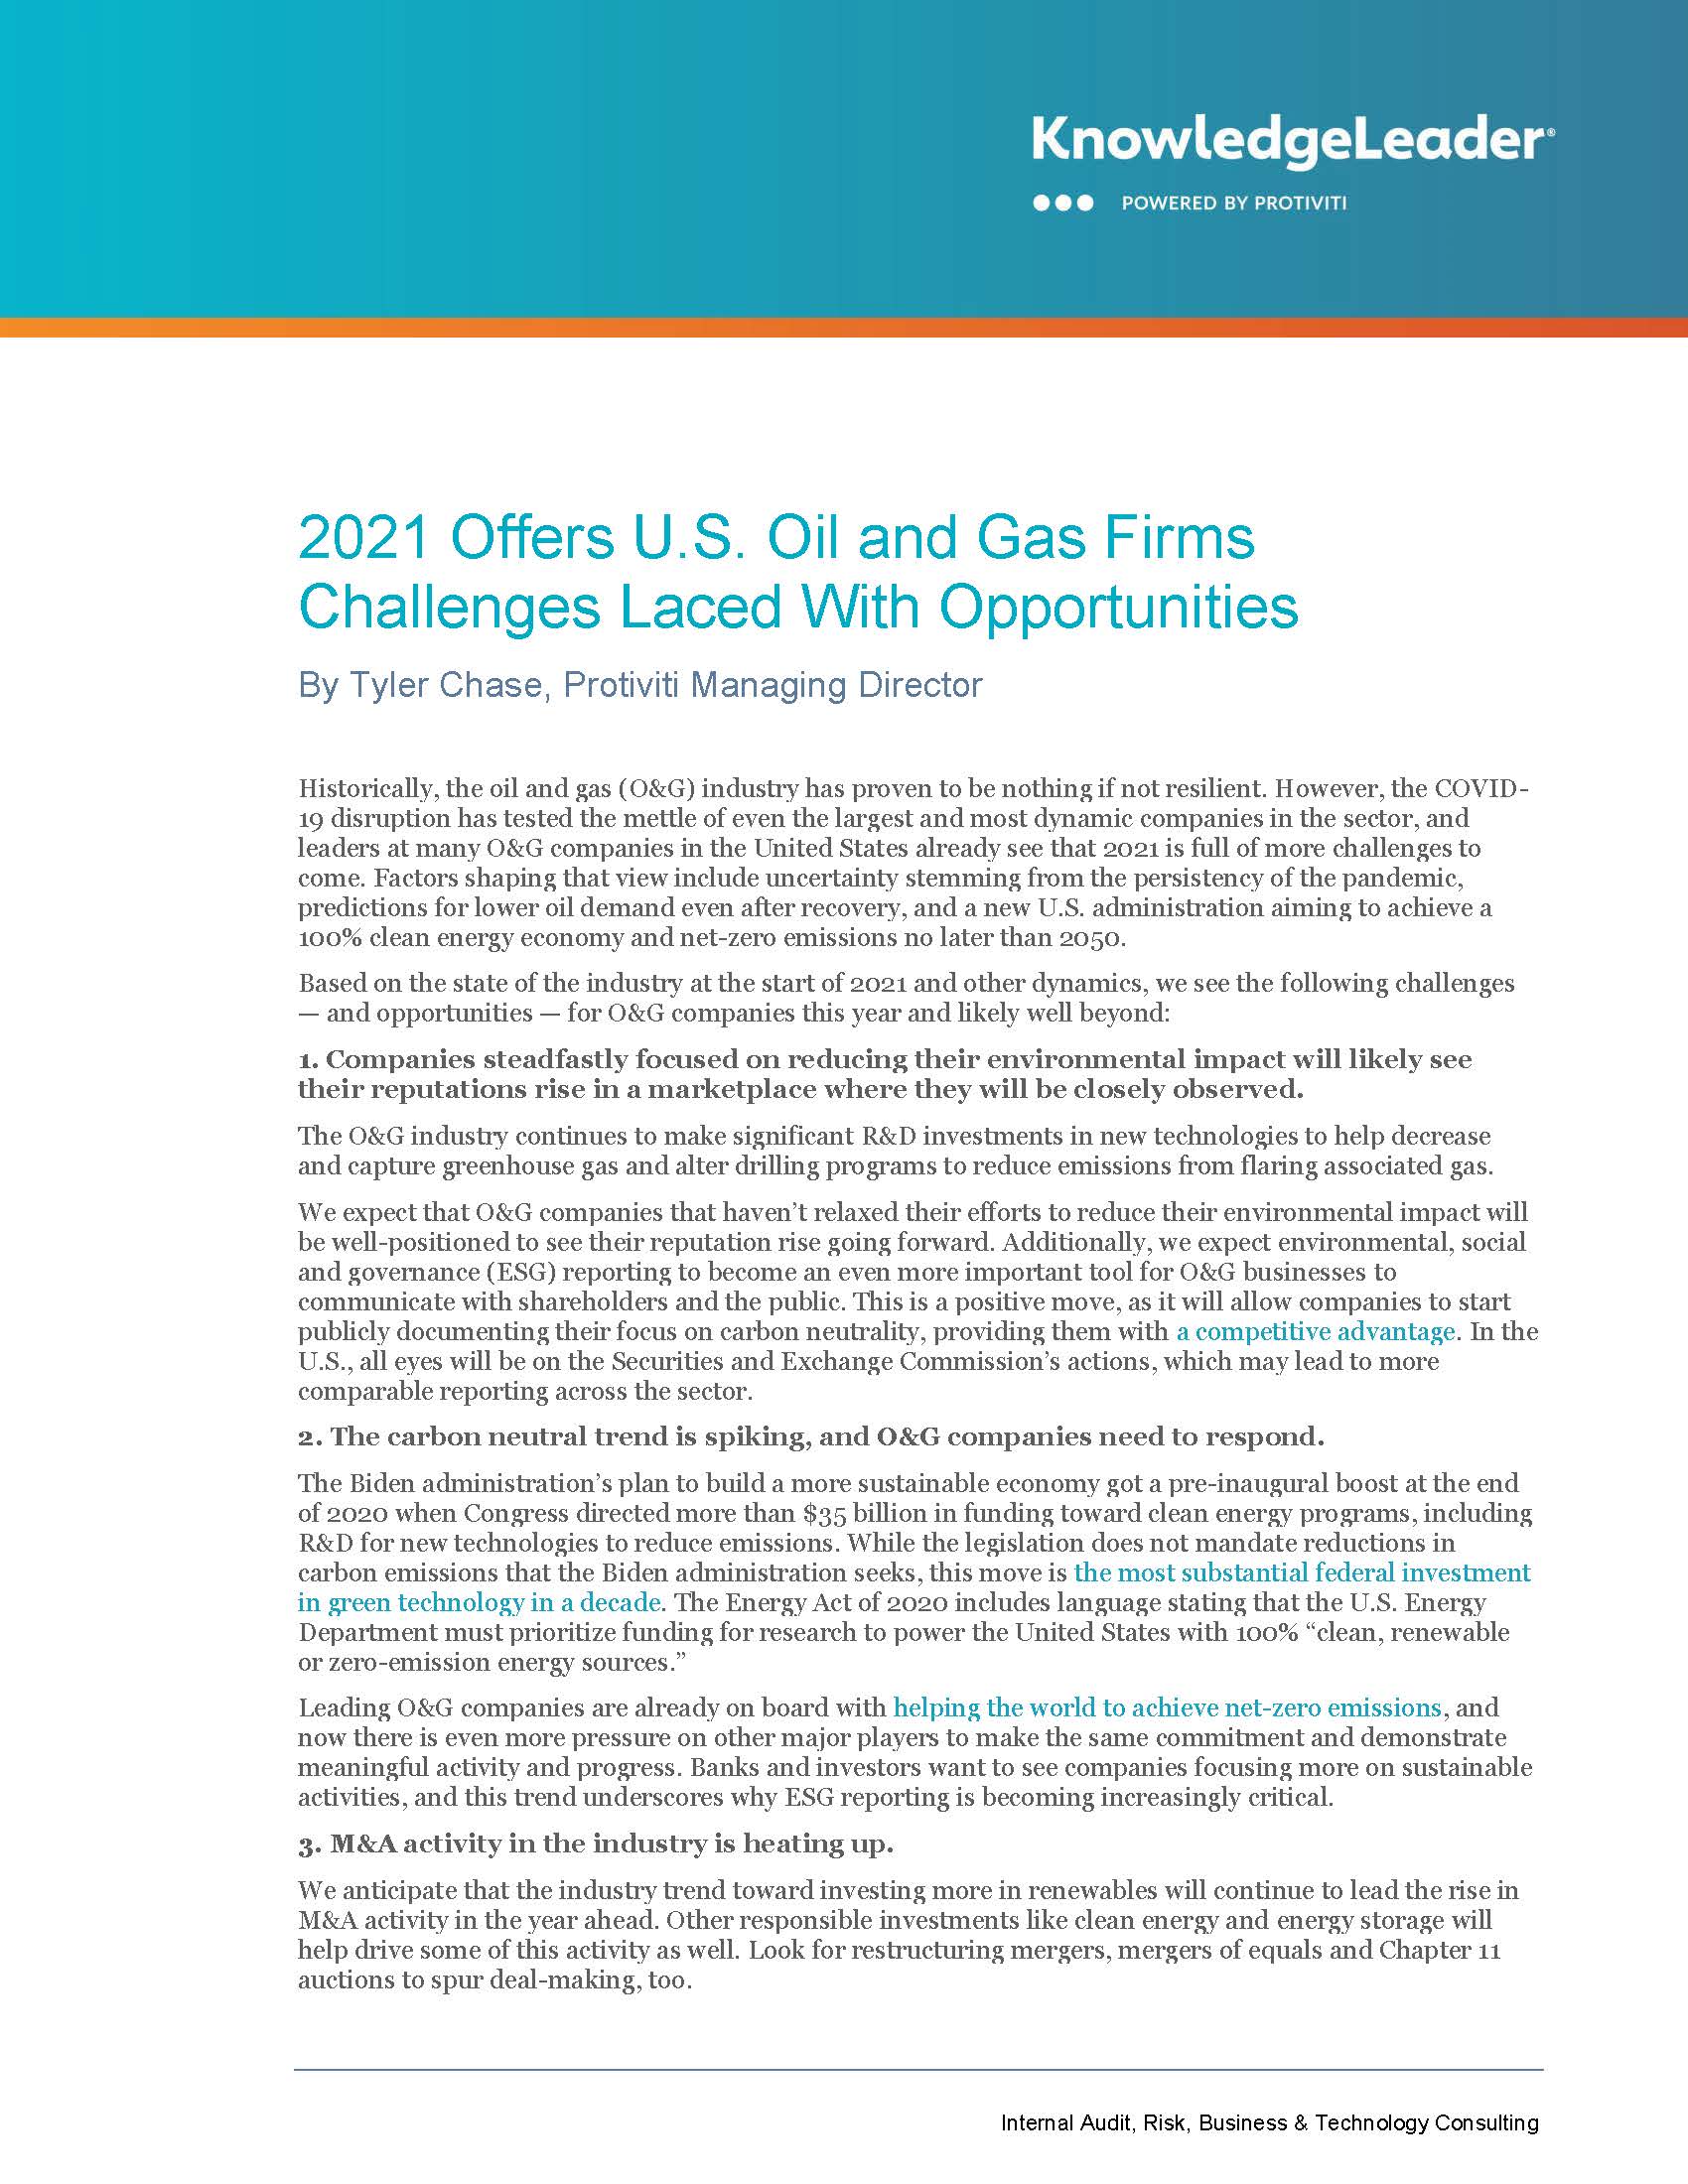 Screenshot of the first page of 2021 Offers U.S. Oil and Gas Firms Challenges Laced With Opportunities